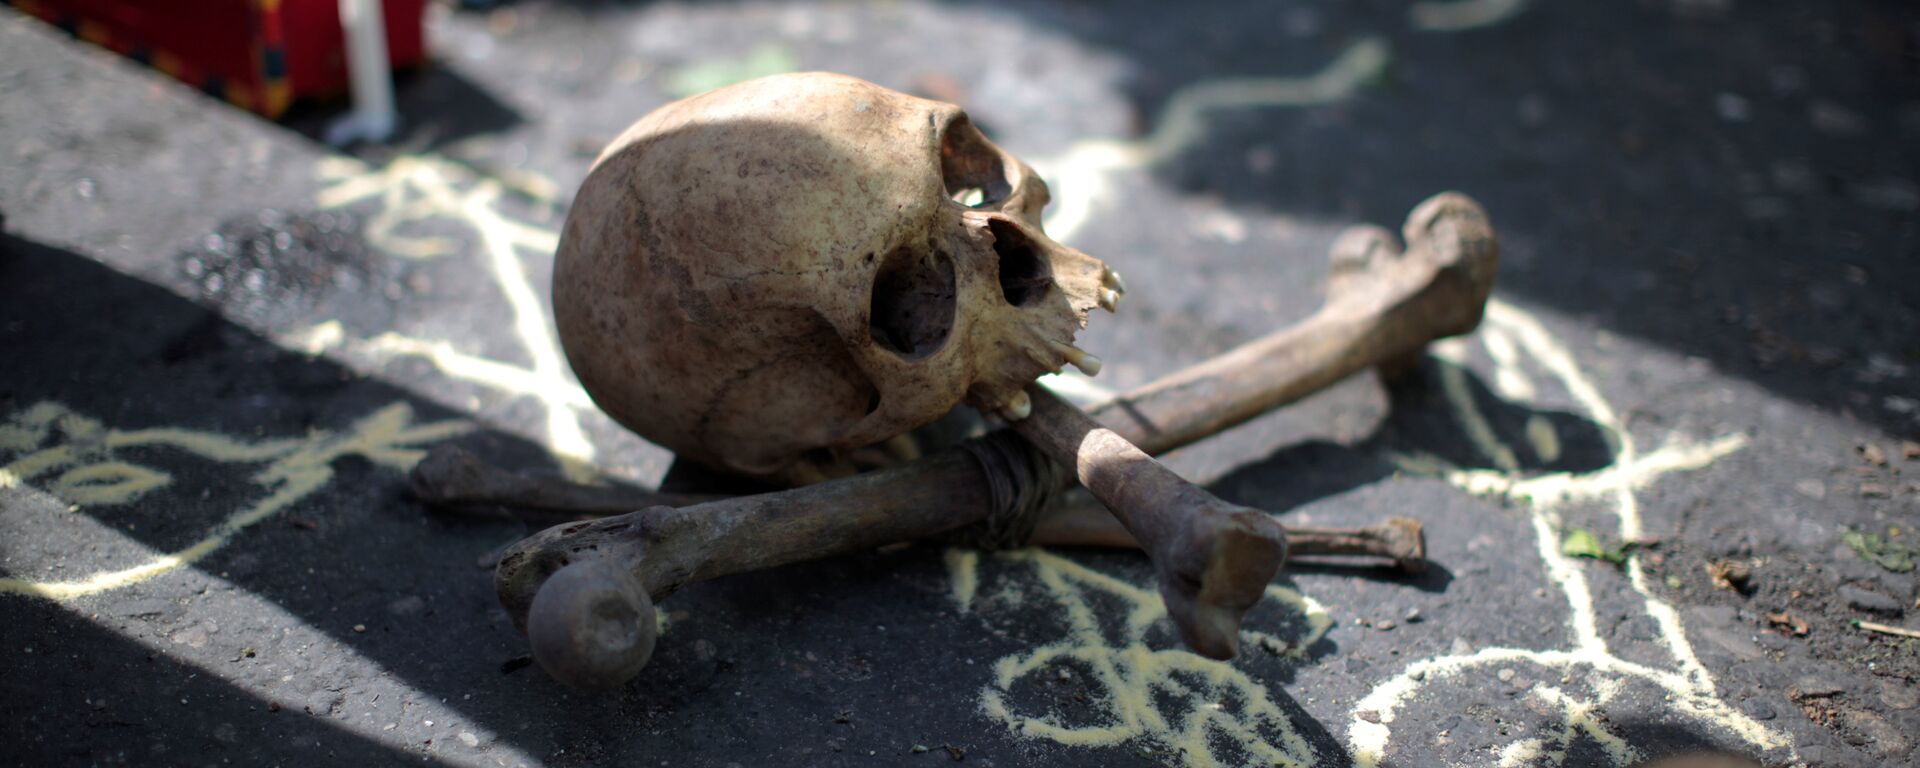 A skull and bones for a voodoo ritual are pictured before a protest against the results of the presidential election in Port-au-Prince, Haiti - Sputnik Mundo, 1920, 03.11.2021